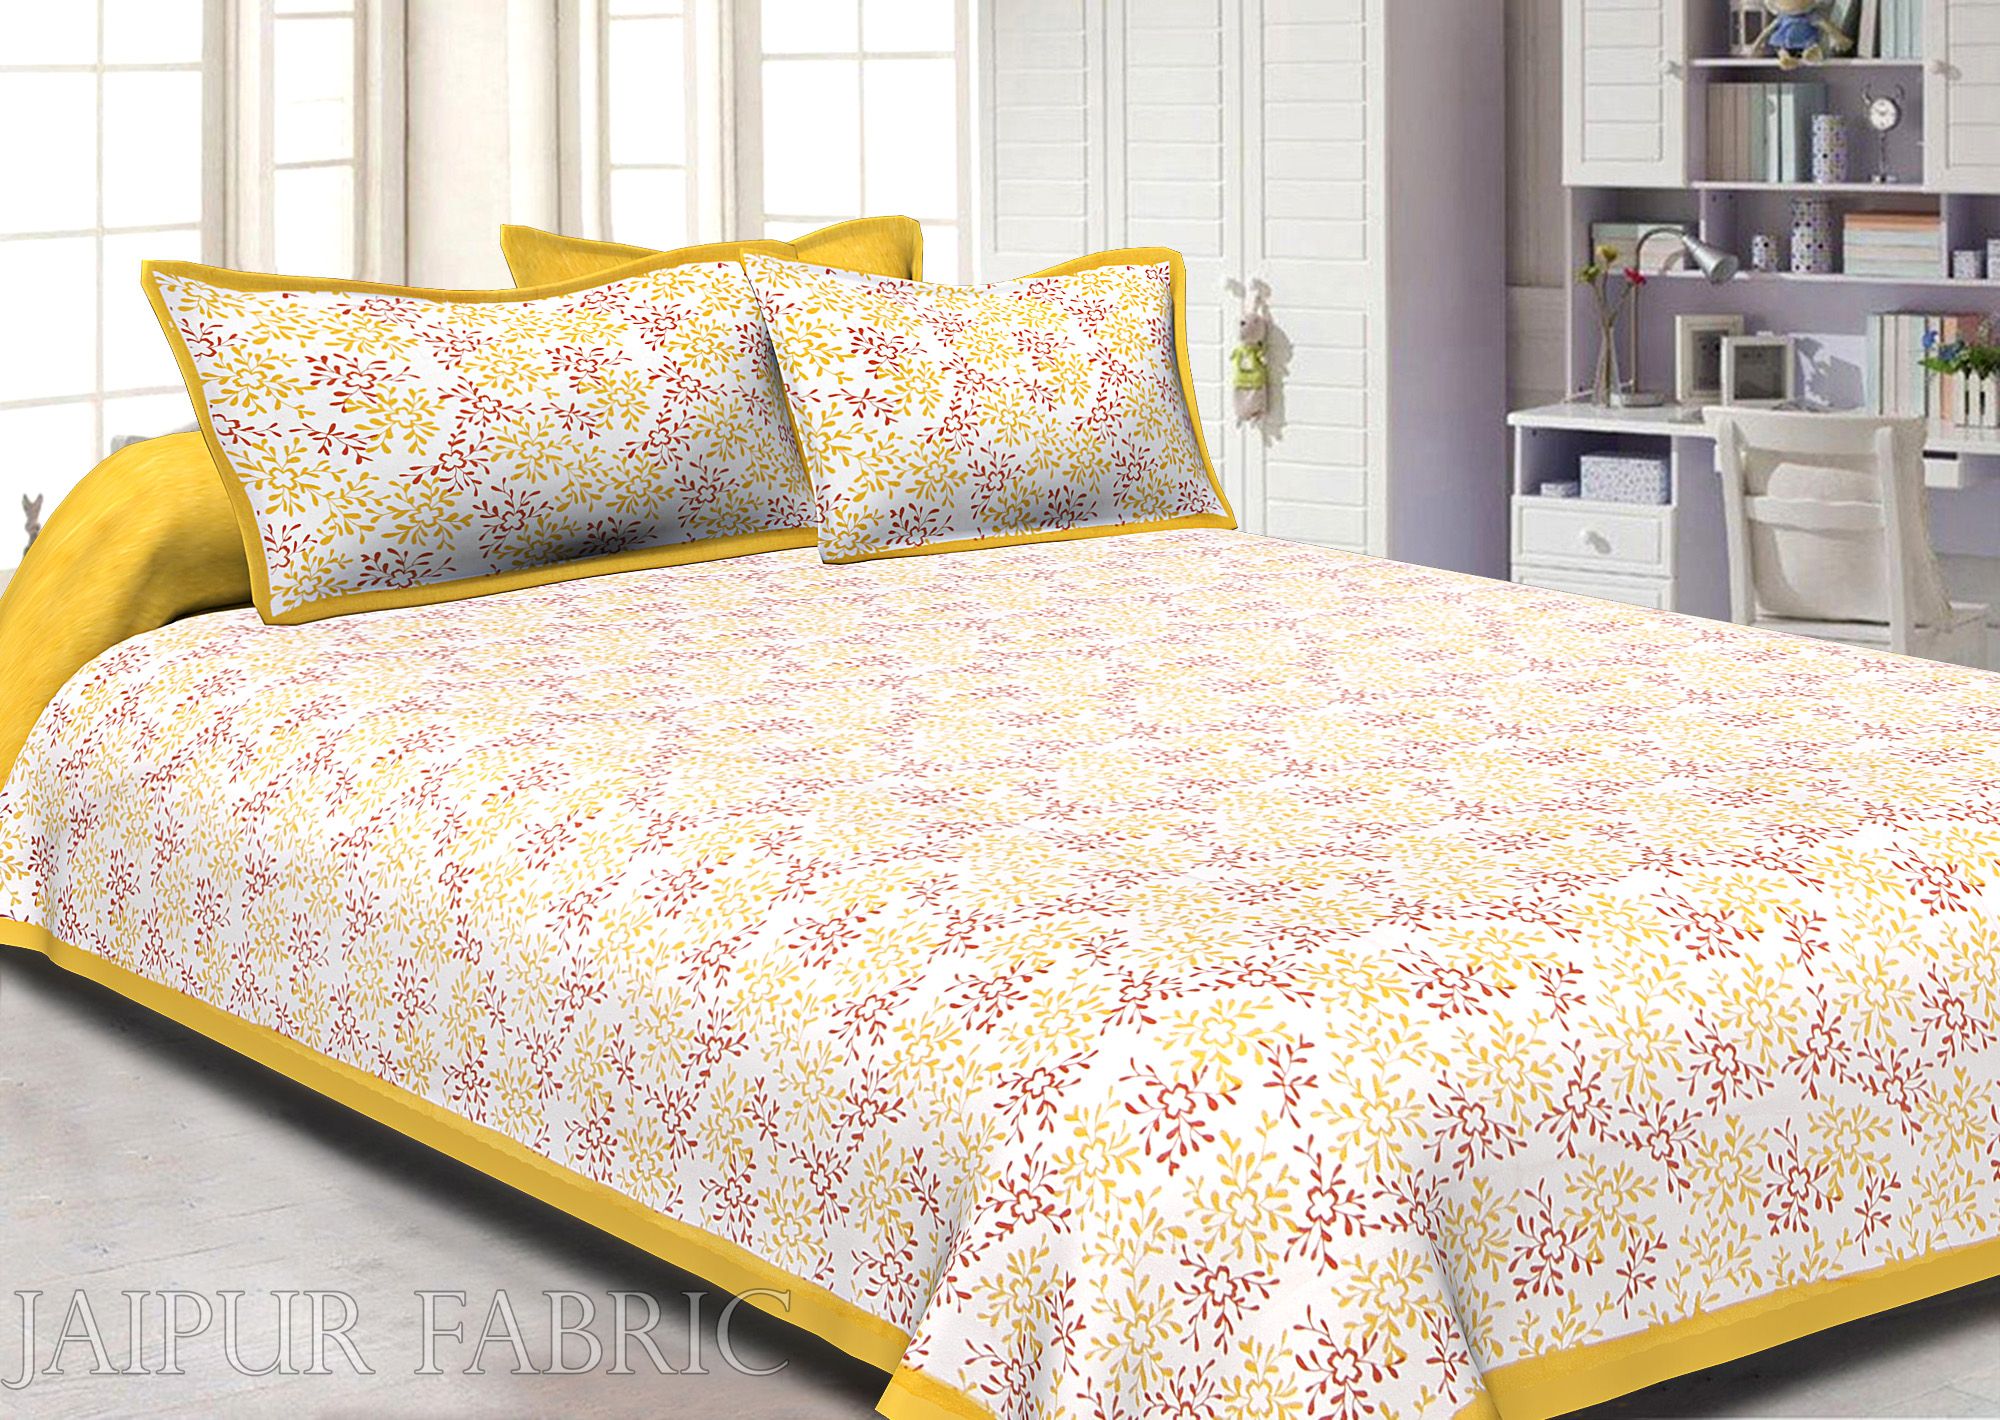 Yellow Border Floral Printed Cotton Double Bed Sheet